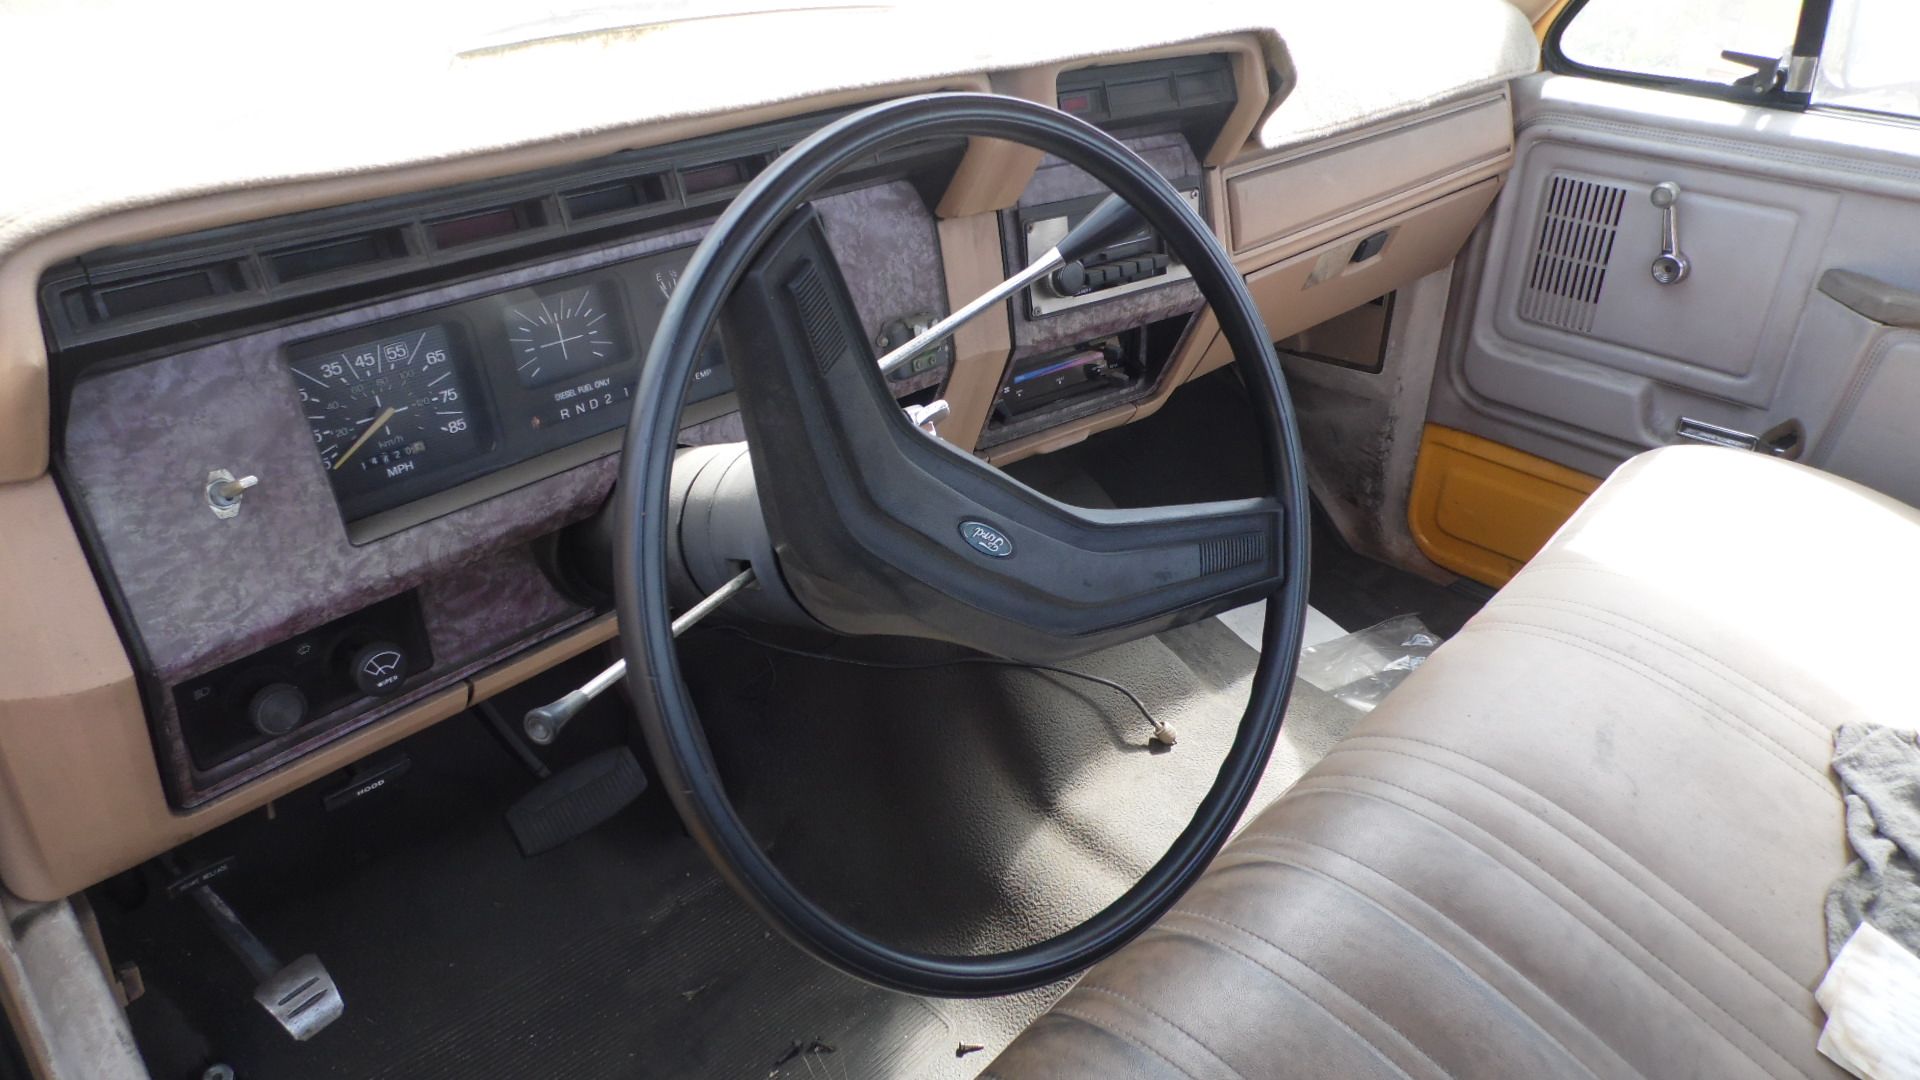 1985 FORD PICK-UP TRUCK (MILEAGE 44,620) (GALE LOCATION) **STARTS UP WITH KEY** - Image 3 of 3